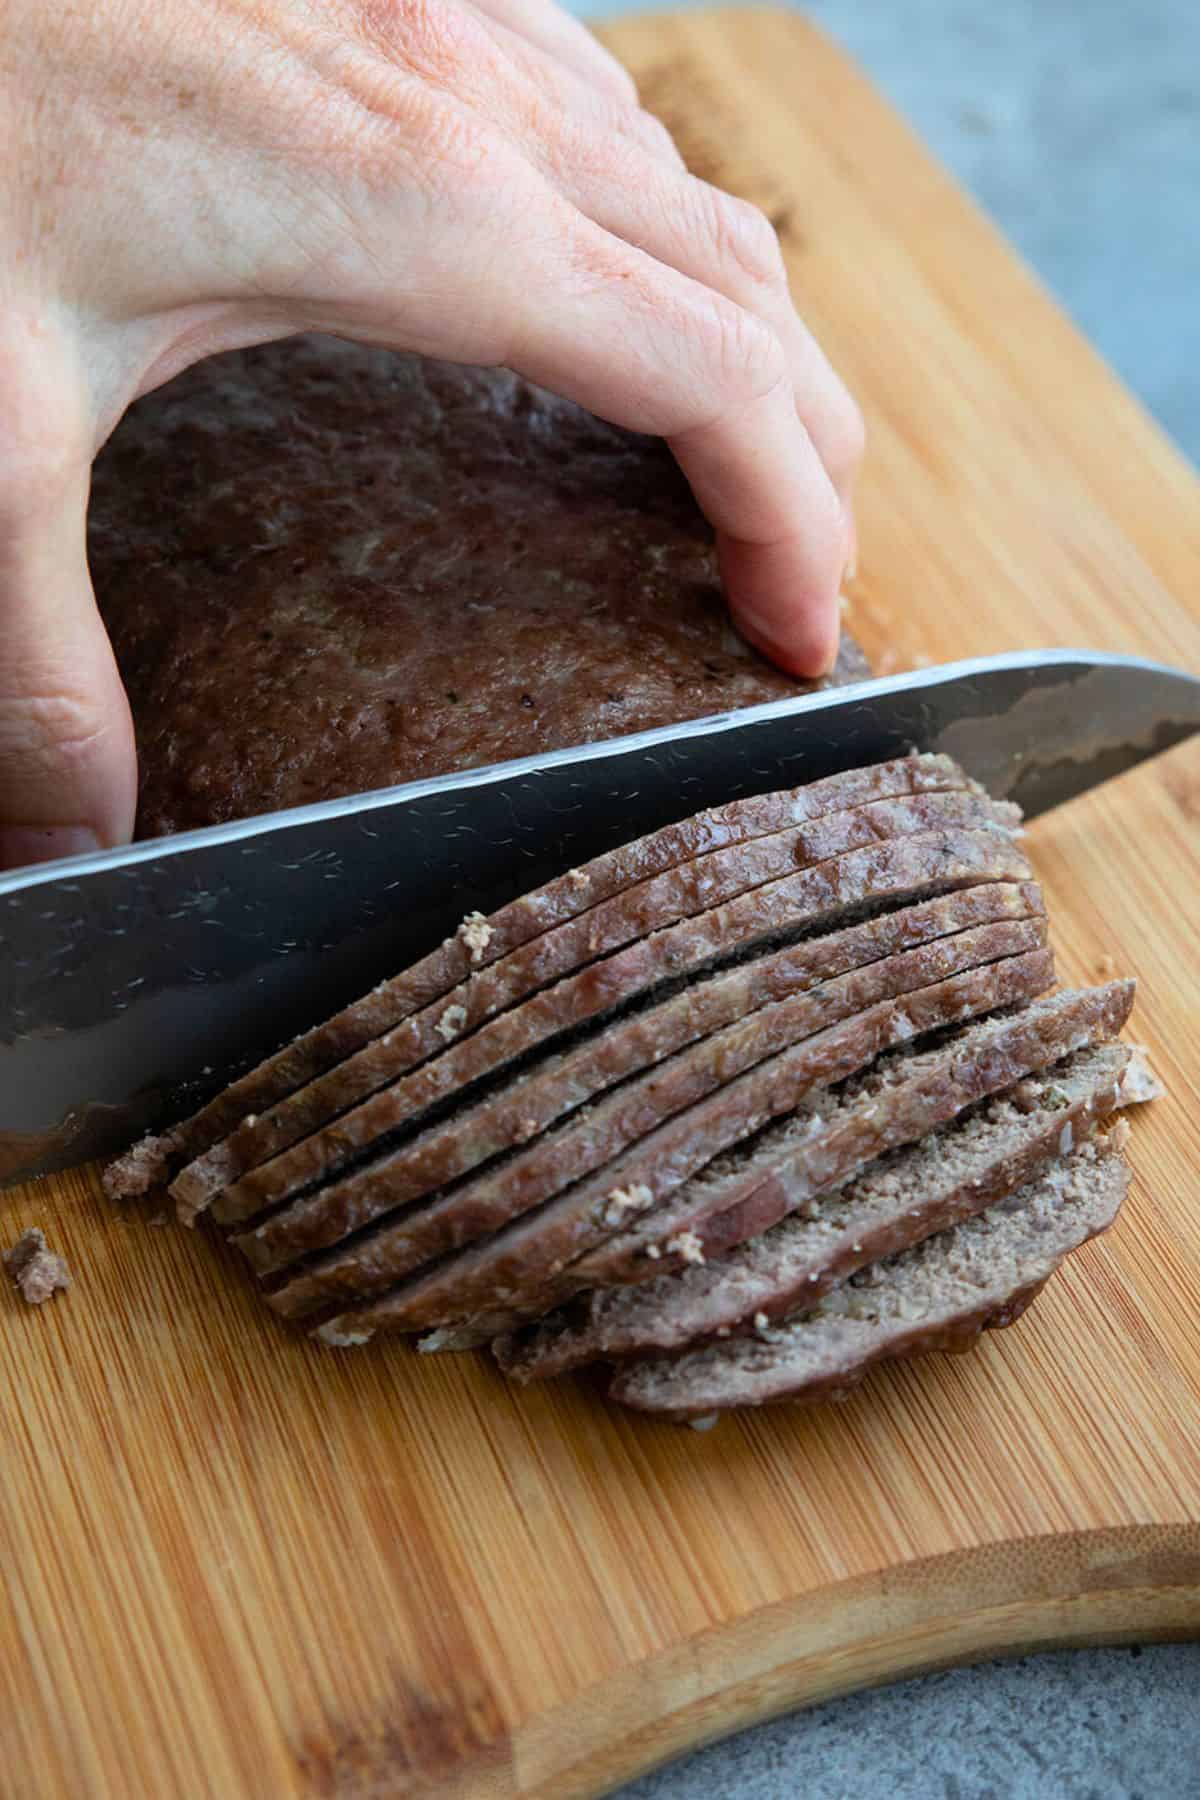 A hand slicing homemade Gyor meat on a cutting board.